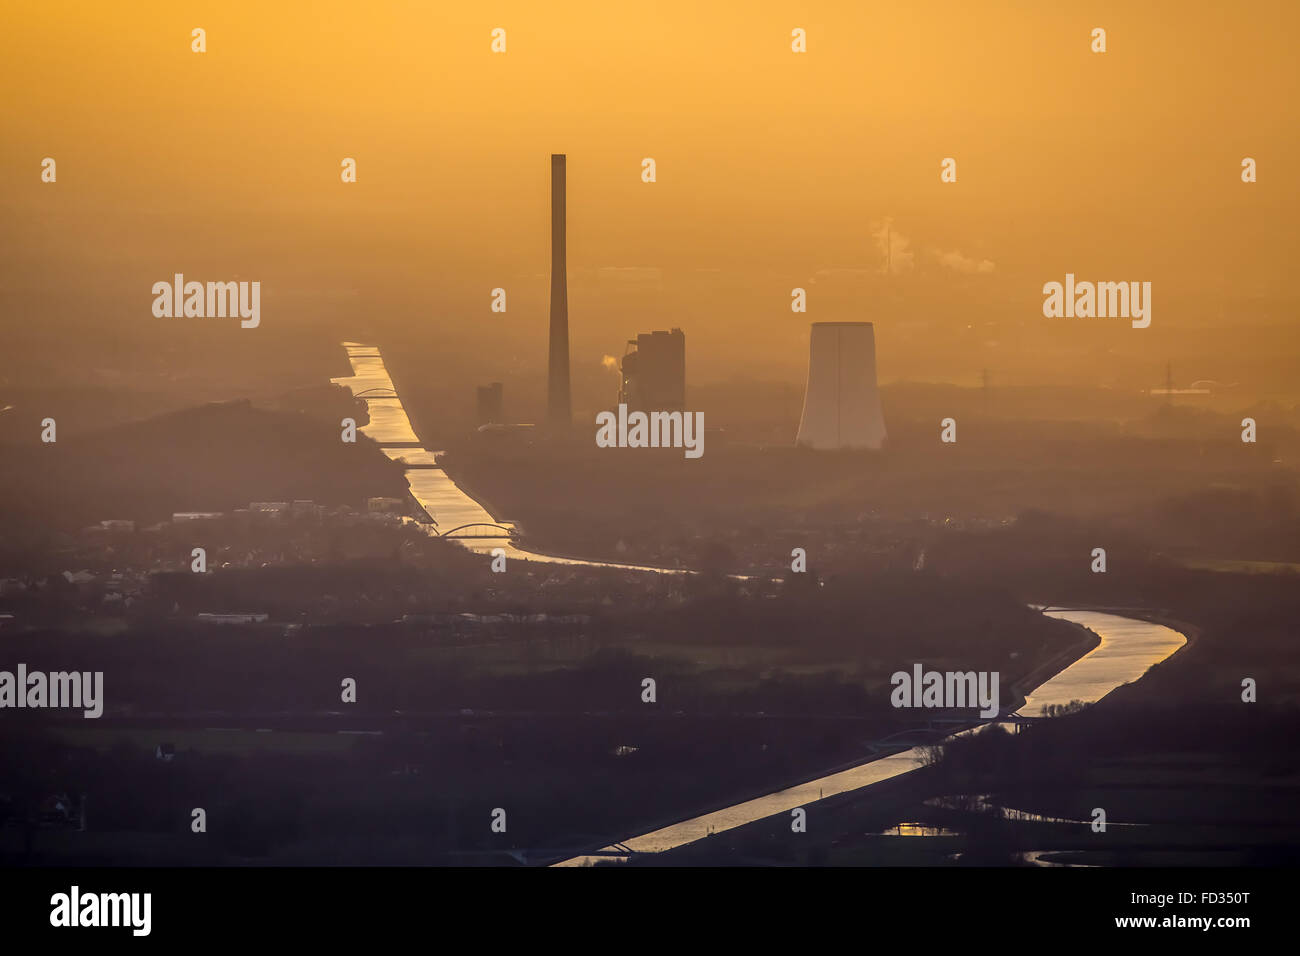 Aerial view, STEAG coal fired power plant Bergkamen on Datteln-Hamm Canal in evening light, smog, haze, hazy weather, Stock Photo